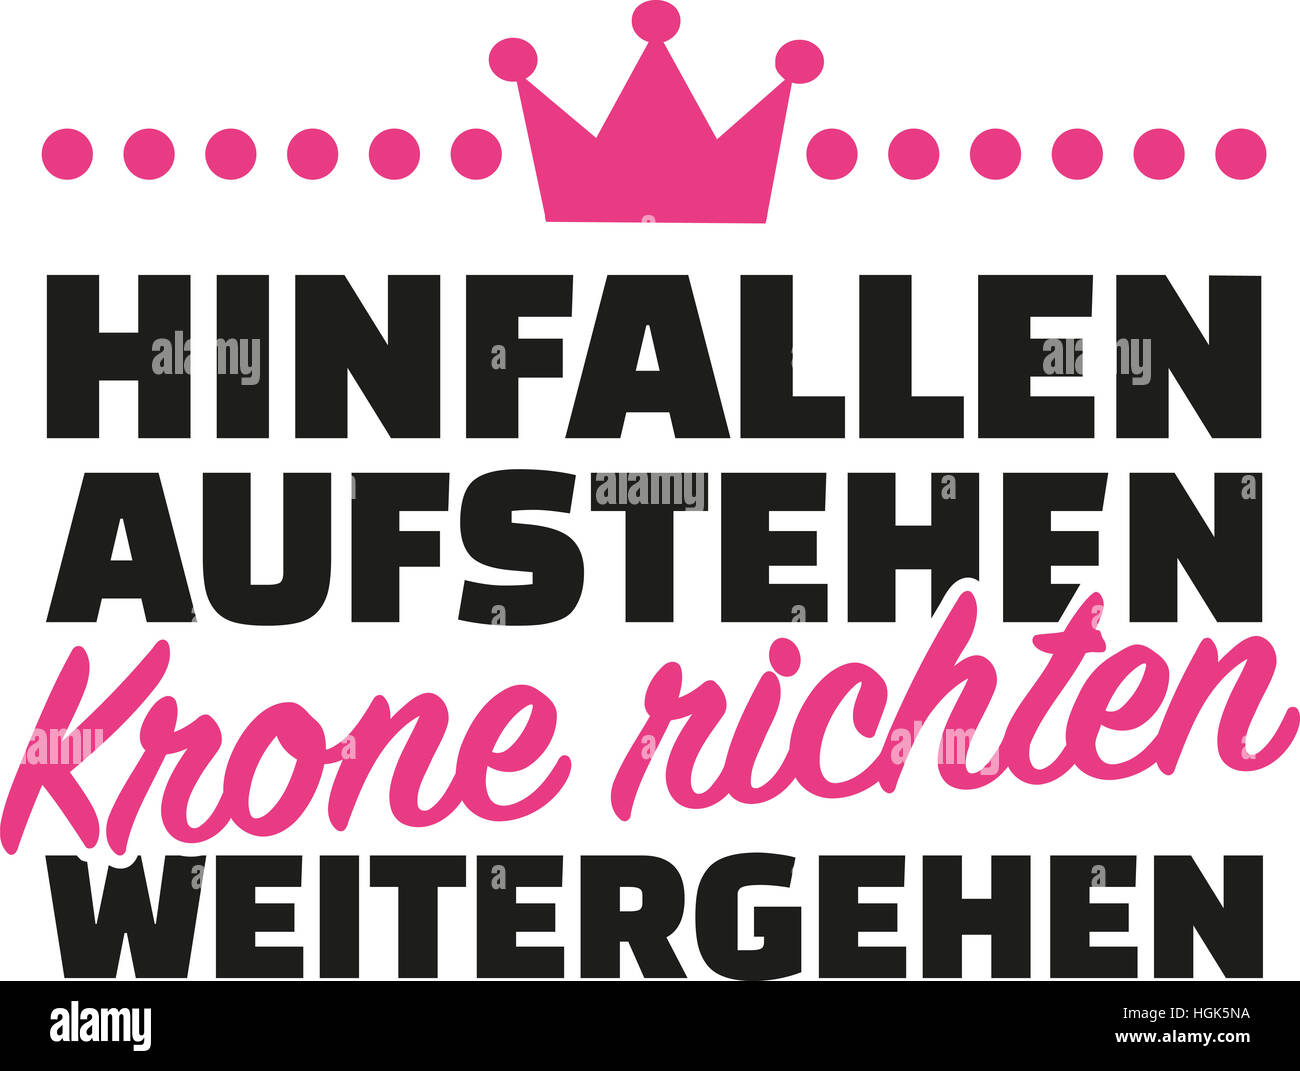 Fall down, get up, straighten crown, carry on. German. Stock Photo